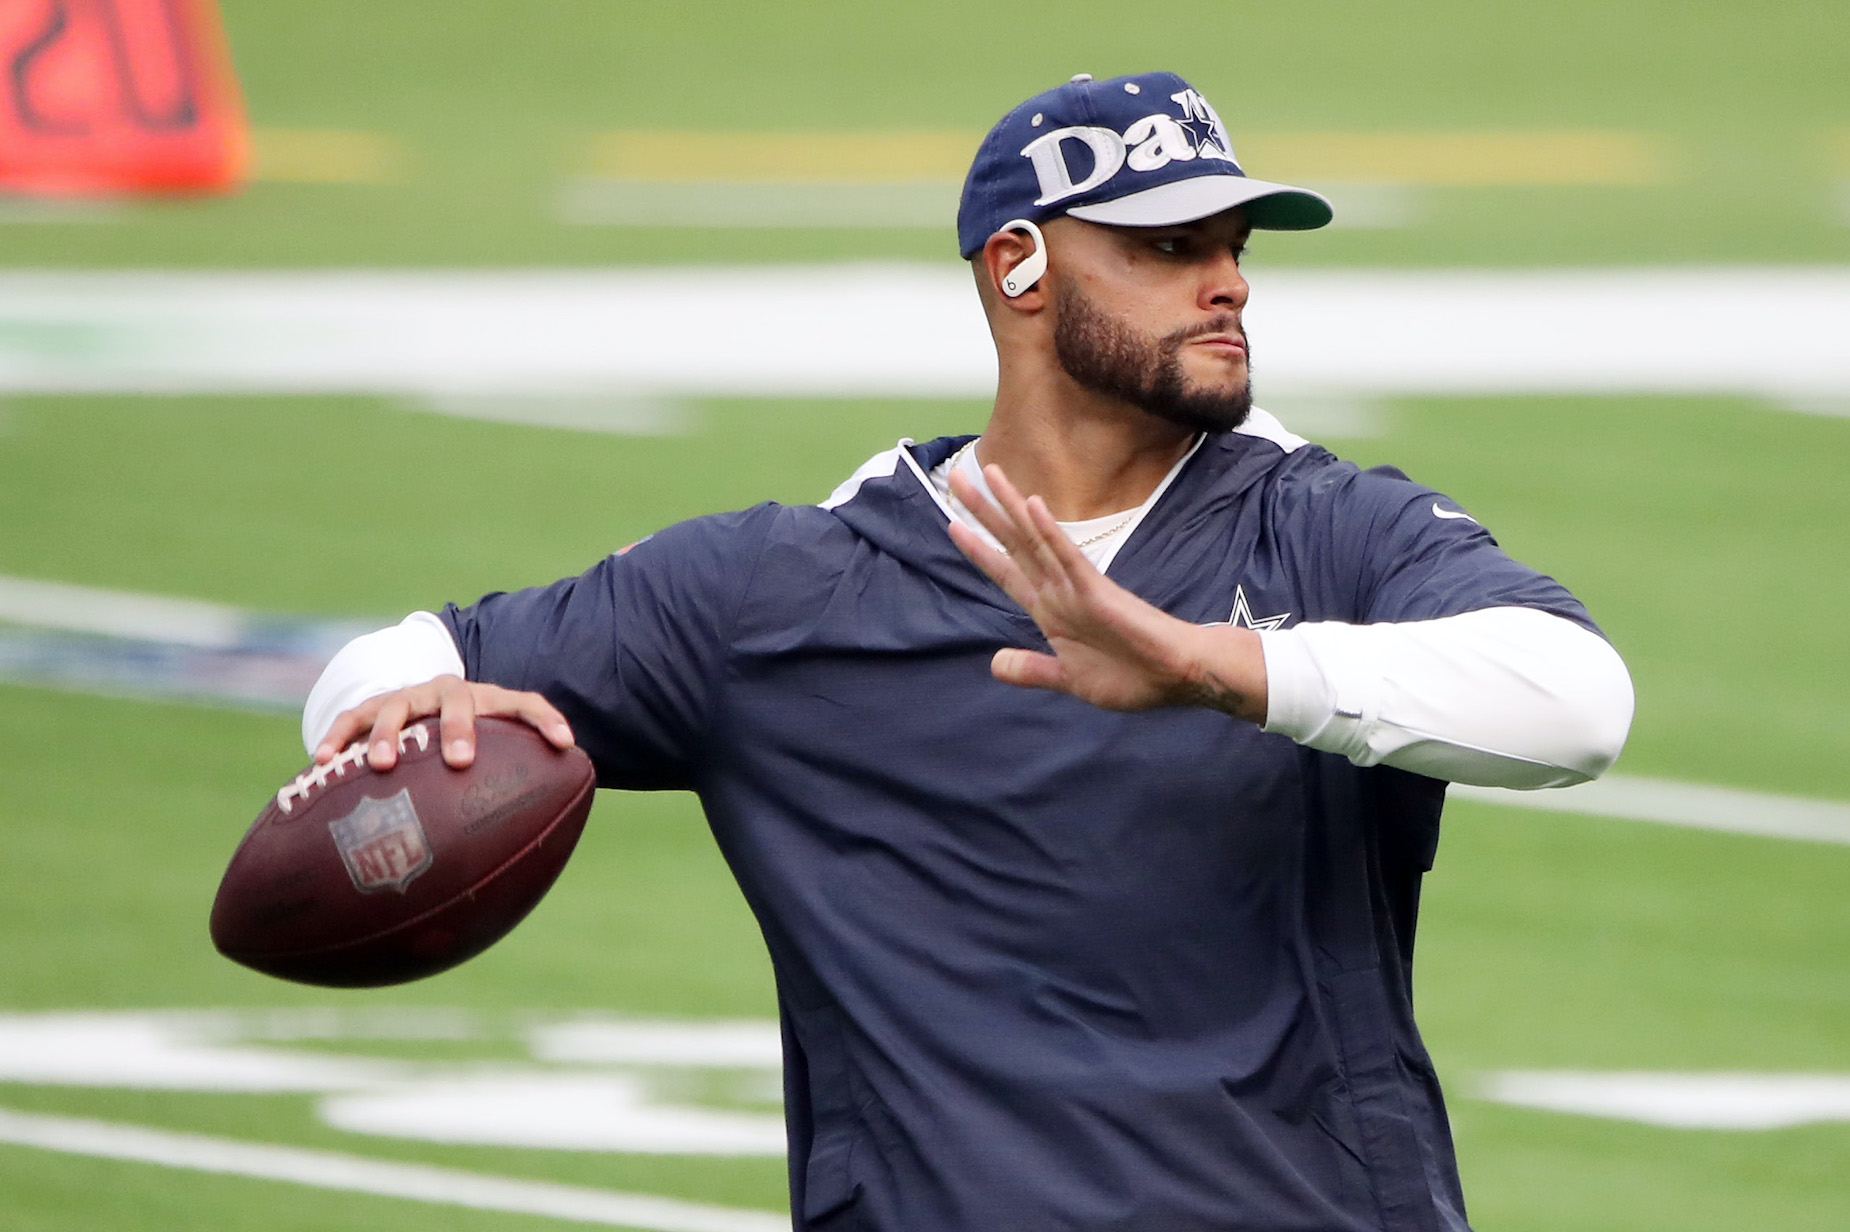 NFL on FOX - Dak Prescott and the Jordan Brand have agreed on a